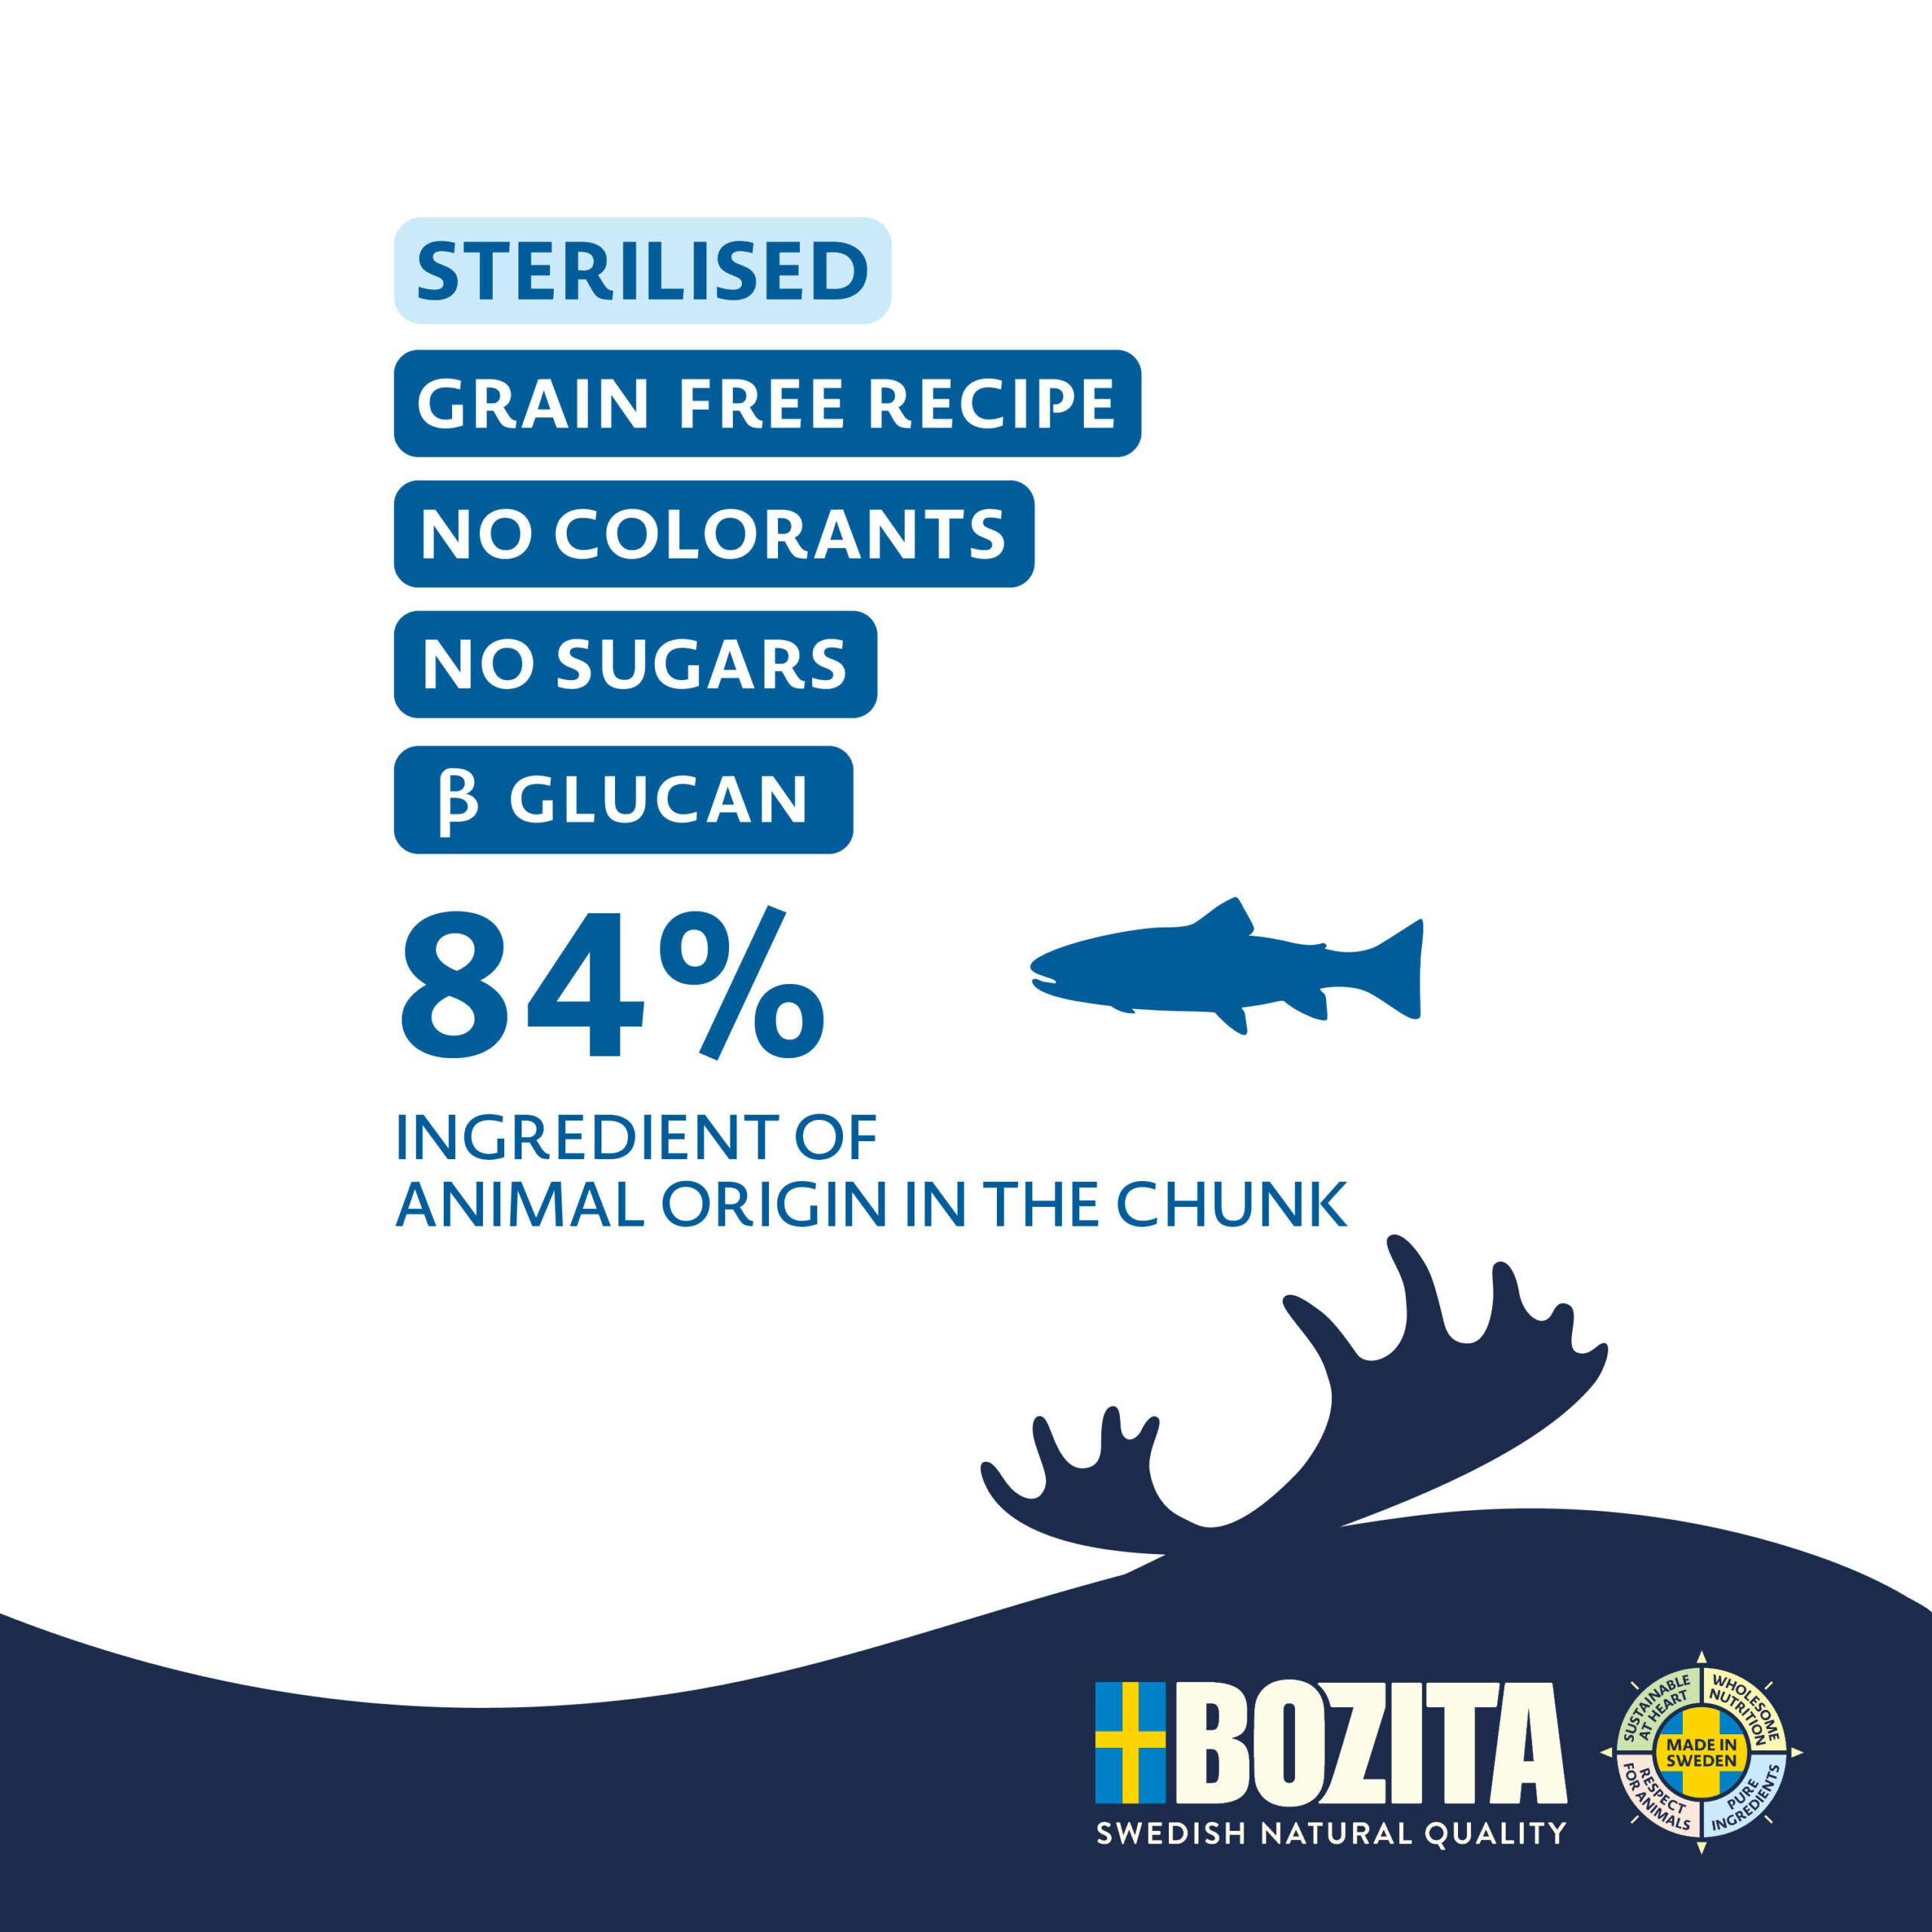 Text about wet food for sterilised cats, taste of artic char